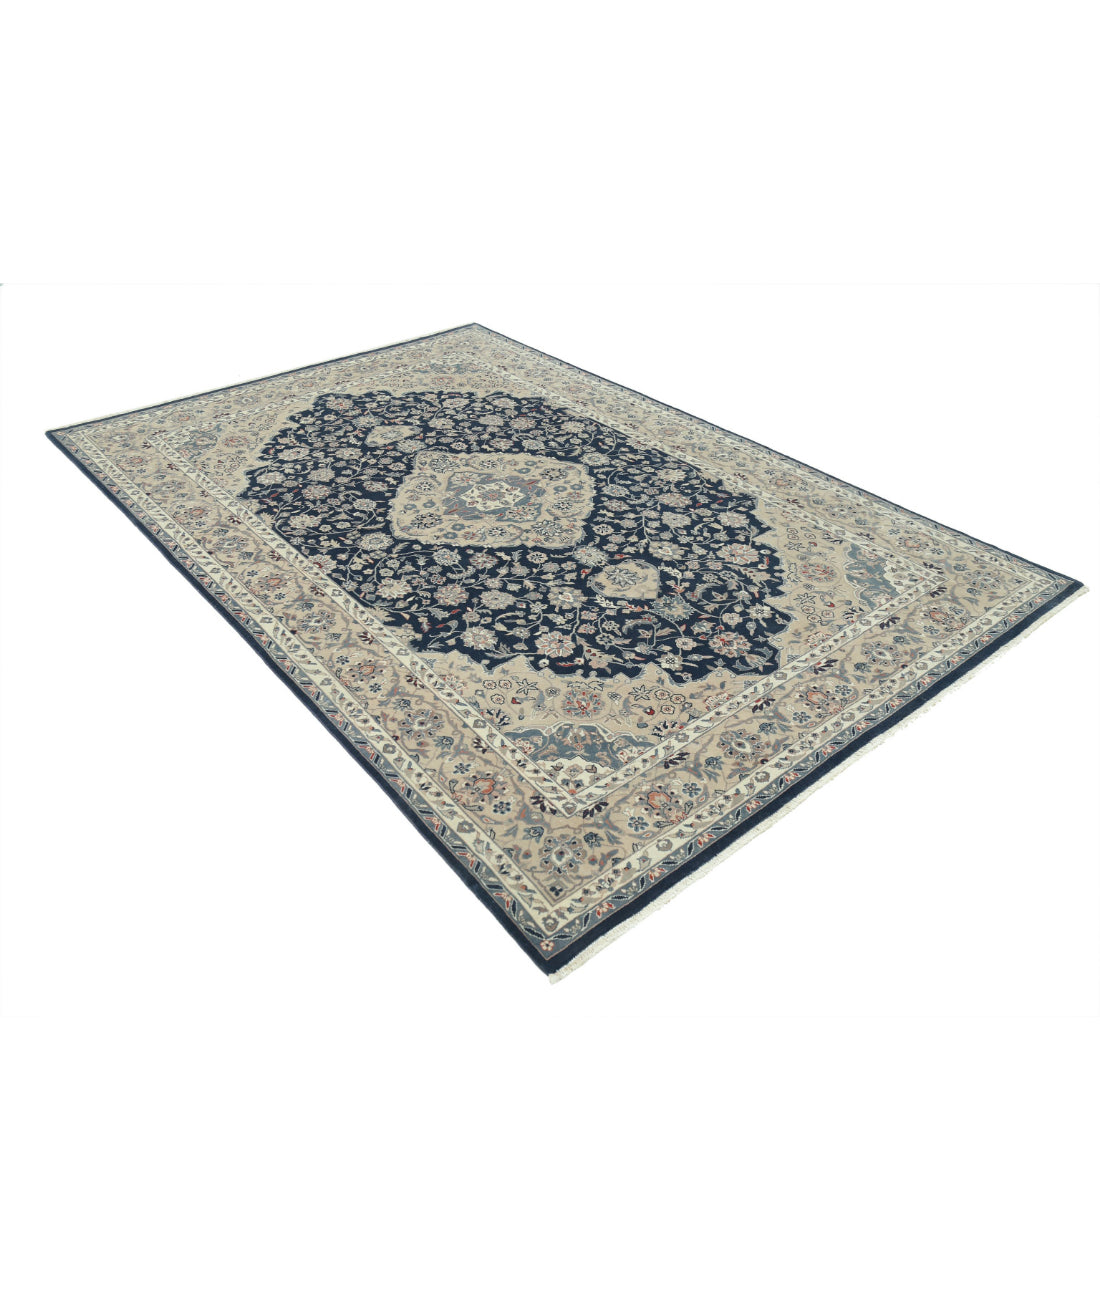 Hand Knotted Heritage Fine Persian Style Wool Rug - 5'11'' x 8'10'' 5'11'' x 8'10'' (178 X 265) / Blue / Taupe